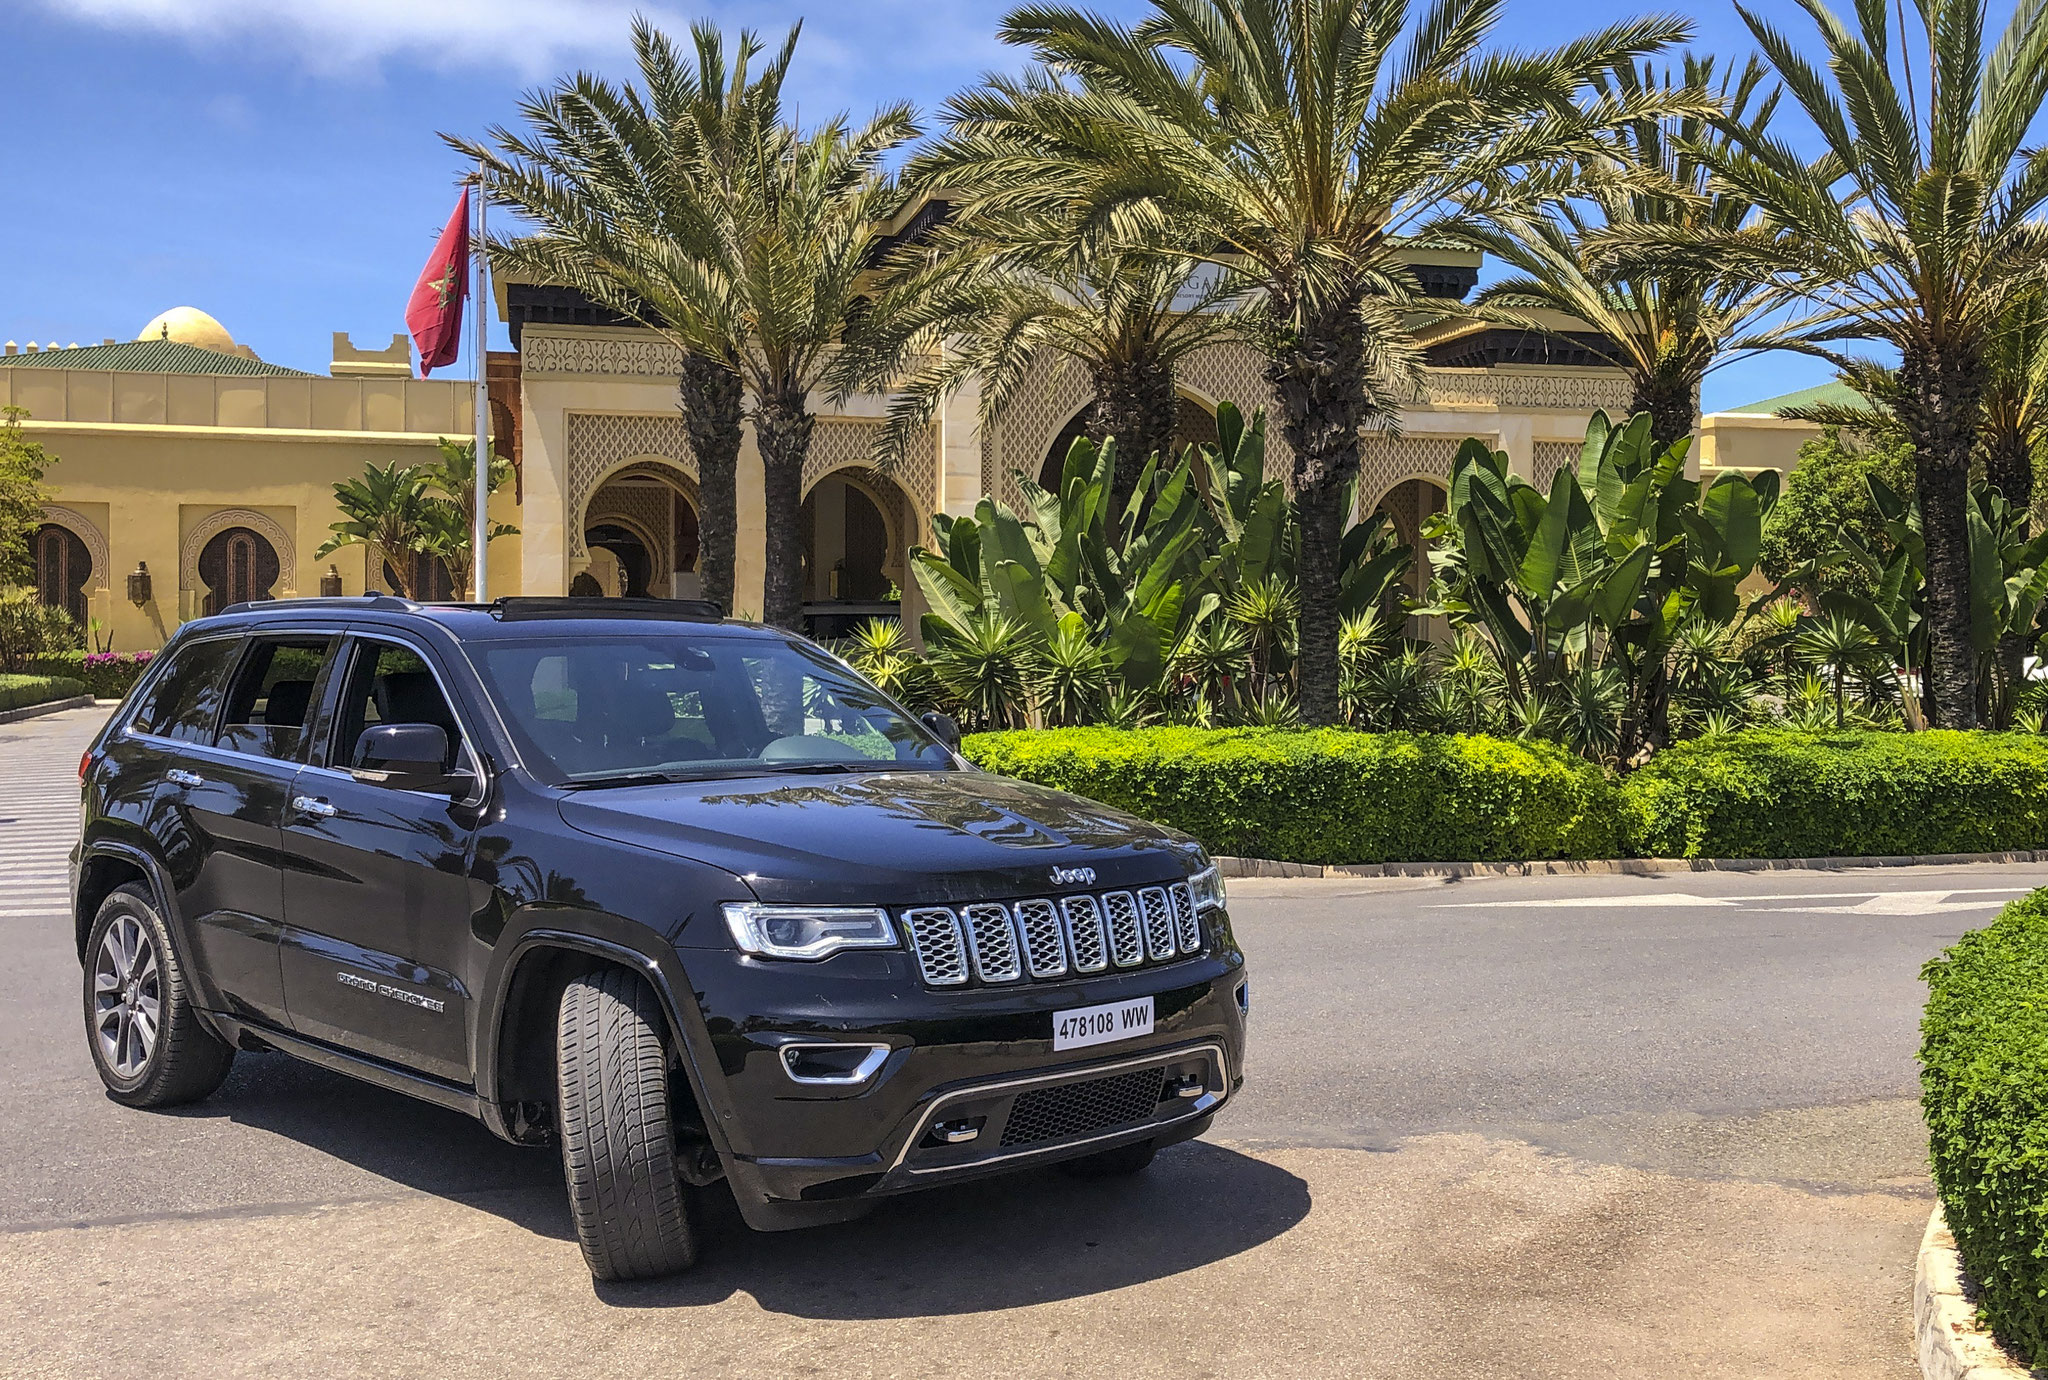 Our Brand-new Jeep Grand Cherokee Overland 2019